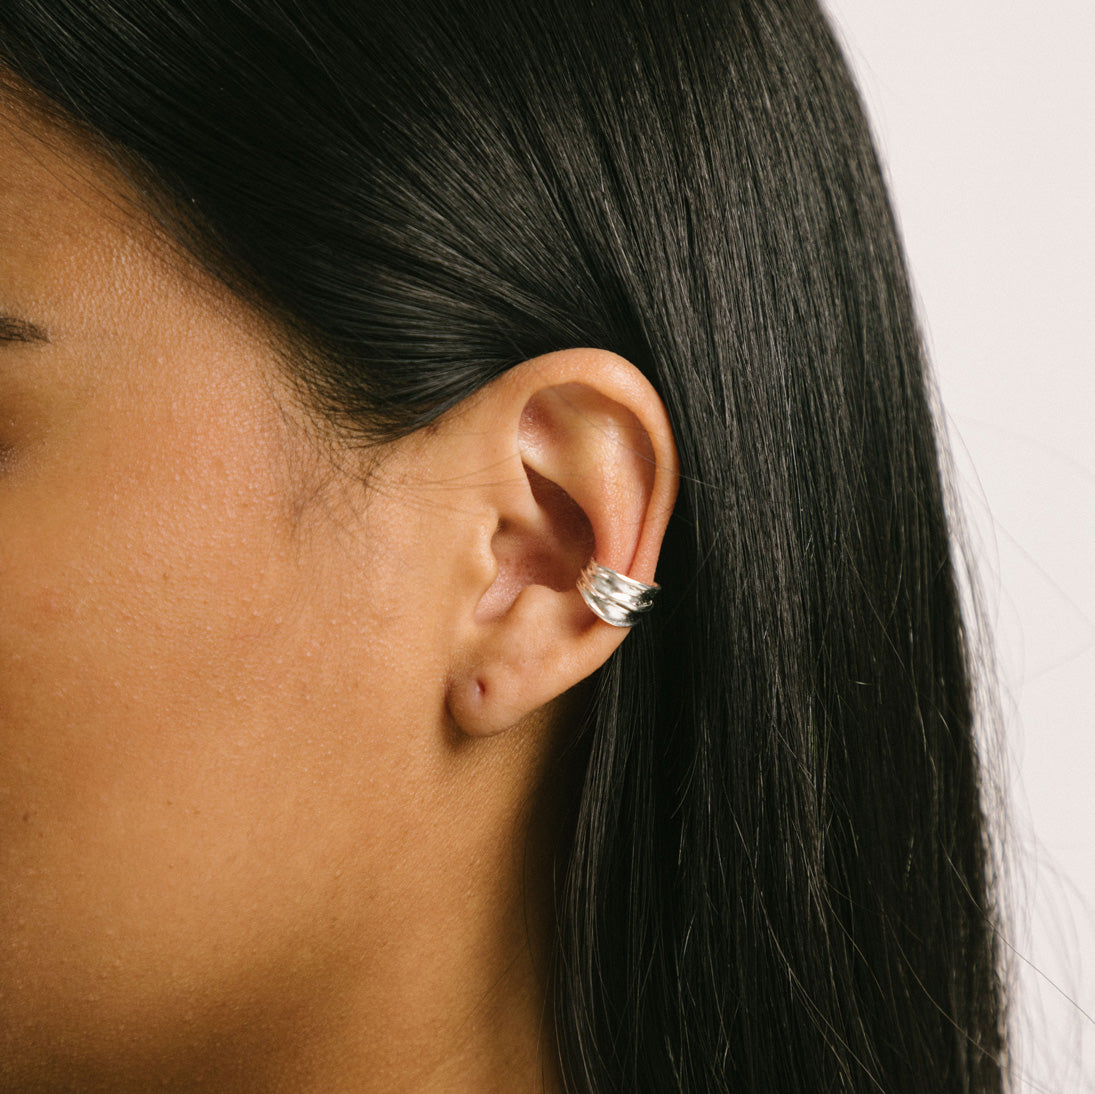 A model wearing the Mona Ear Cuff in Silver is designed for all ear types, providing a comfortable, medium secure hold for up to 24 hours. It features the ability to adjust with gentle squeezing, crafted with 925 Sterling Silver in one piece.